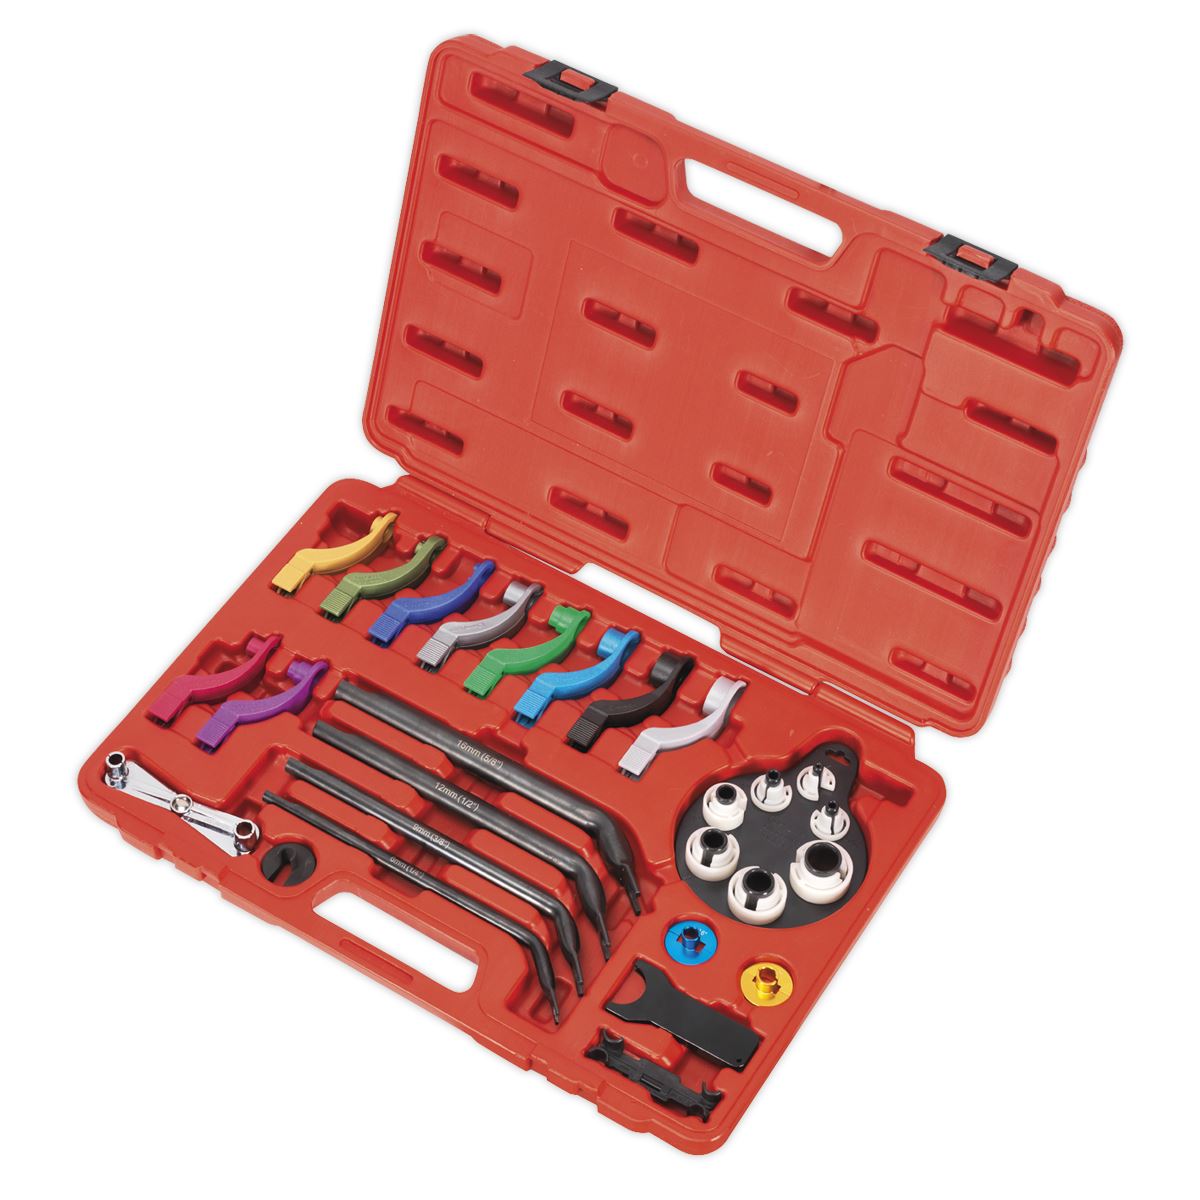 Sealey Fuel & Air Conditioning Disconnection Tool Kit 27pc